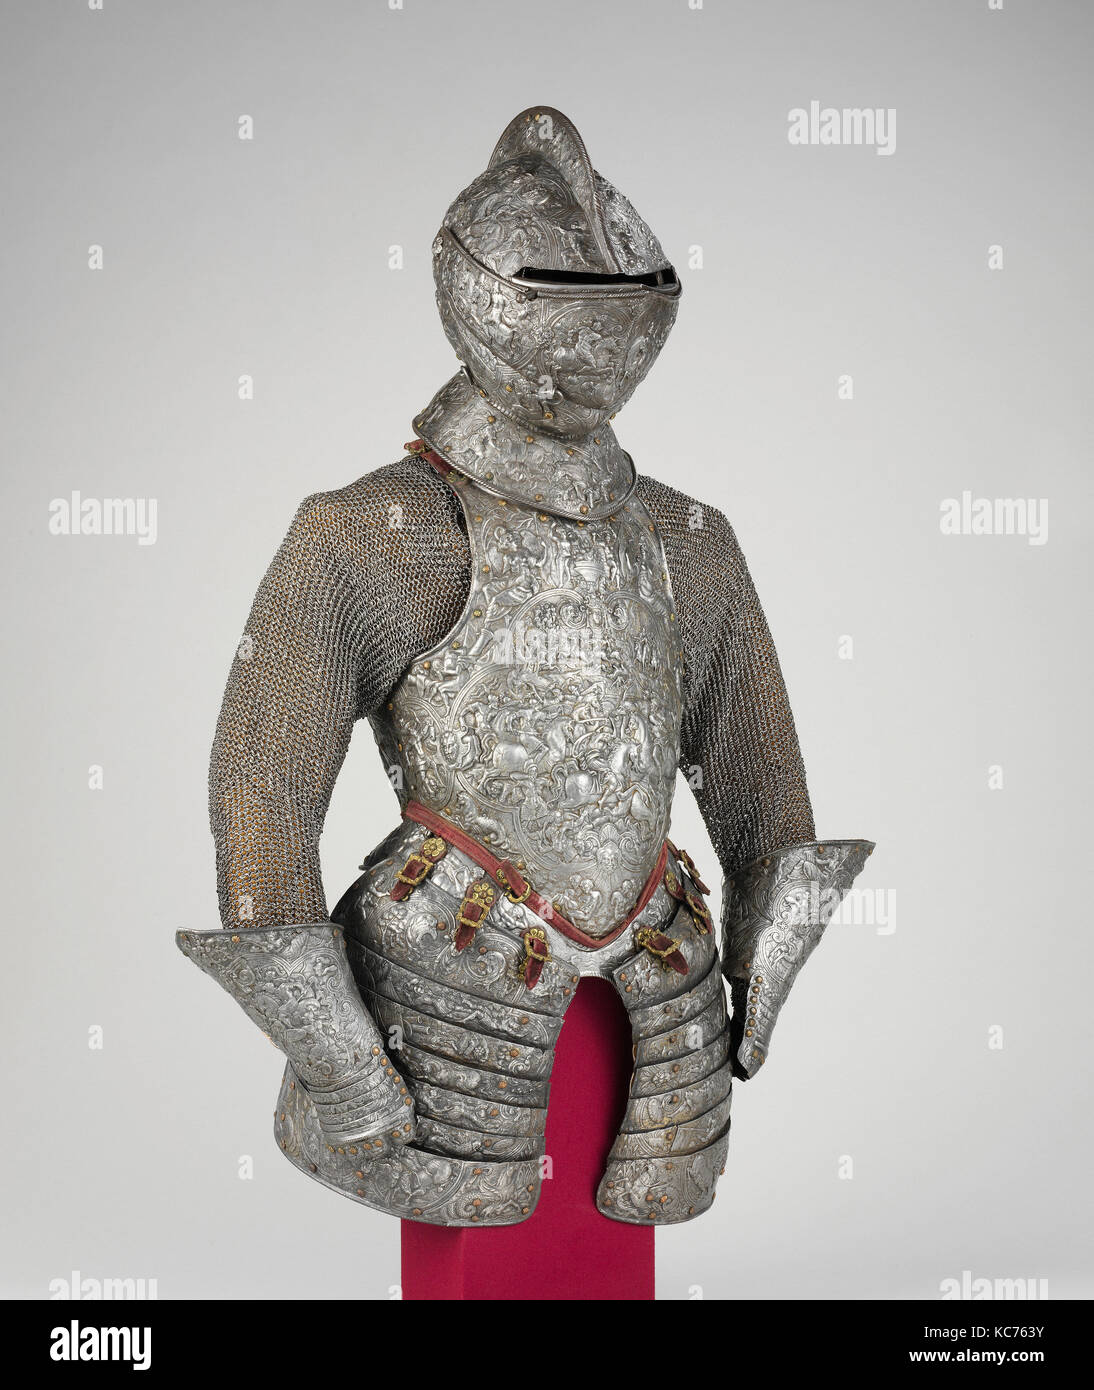 https://c8.alamy.com/comp/KC763Y/portions-of-a-ceremonial-armor-ca-157580-french-steel-copper-alloy-KC763Y.jpg